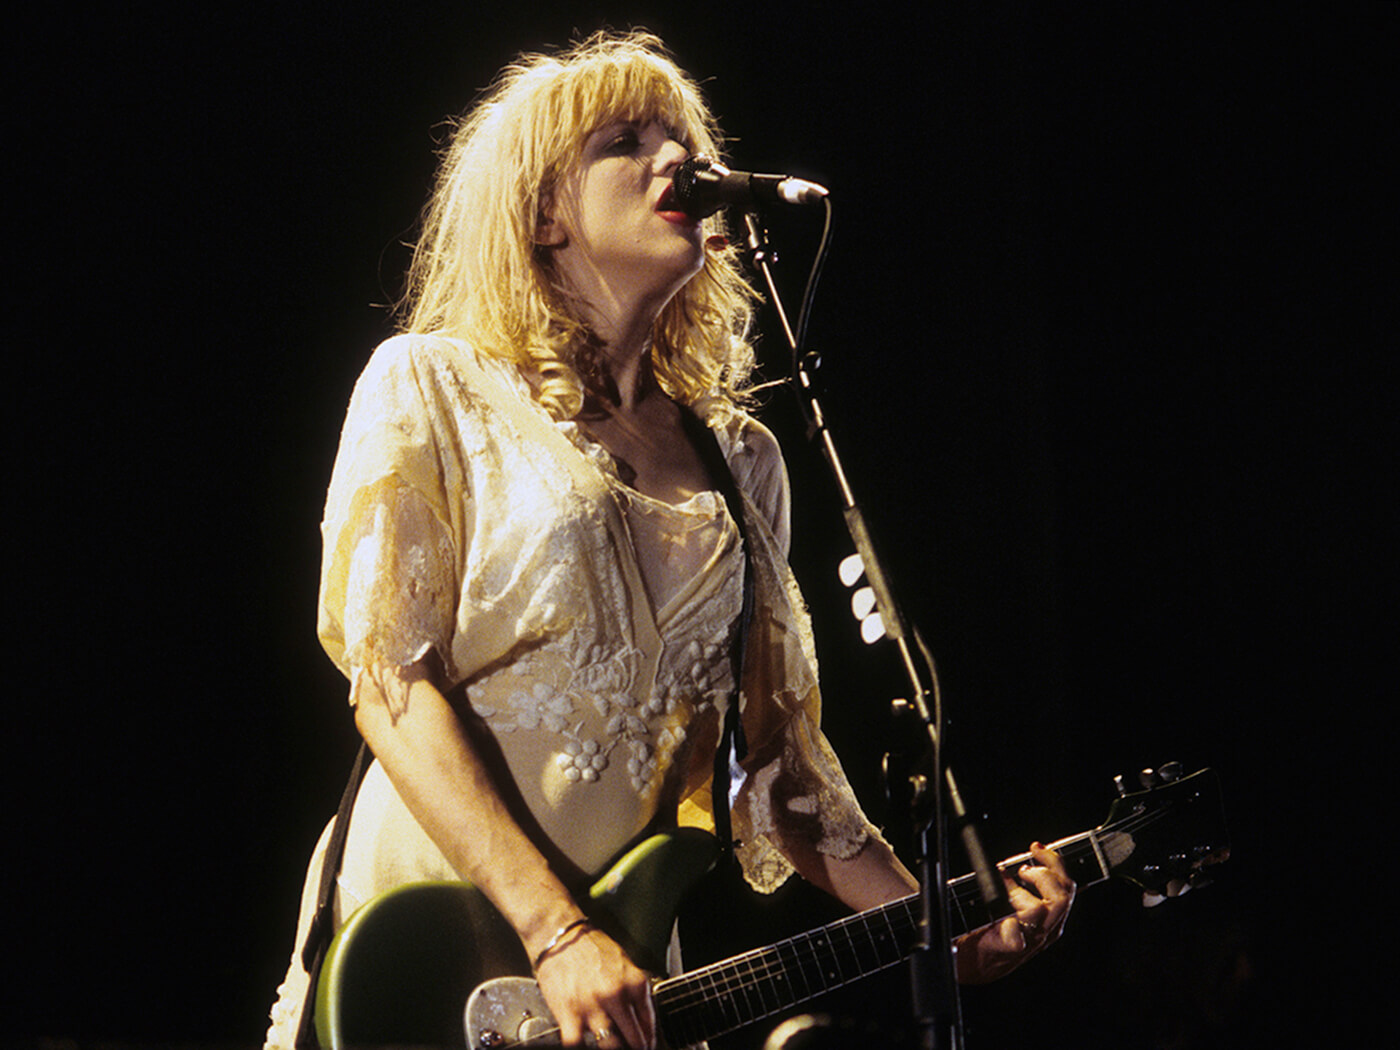 Courtney Love performing with Hole in 1994, photo by Jim Steinfeldt/Michael Ochs Archives via Getty Images